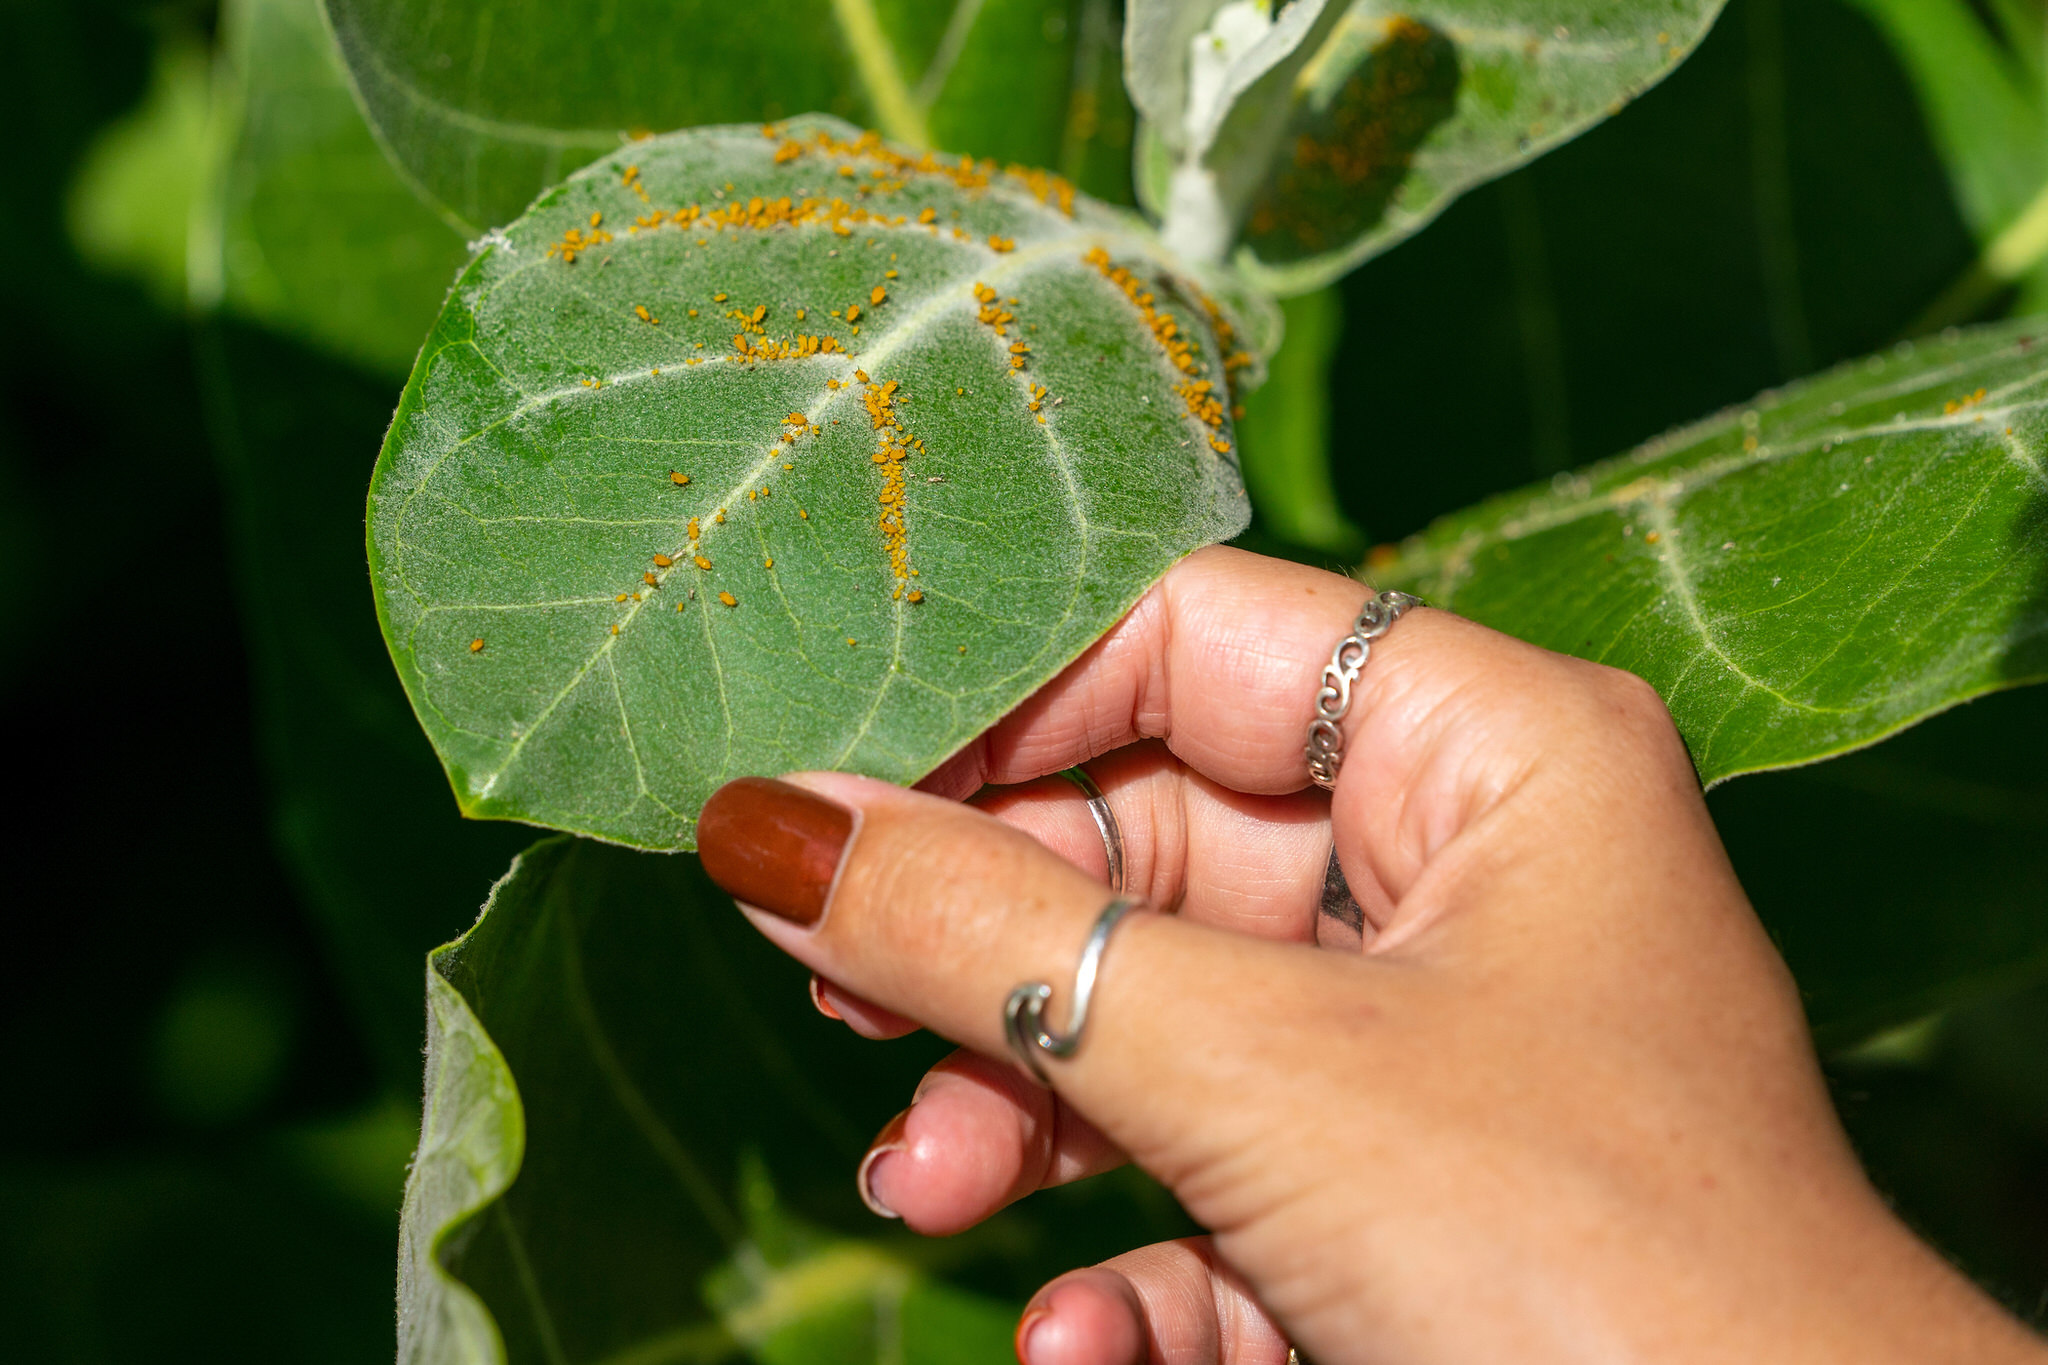 Hand holding leaf that has small yellow bugs on it